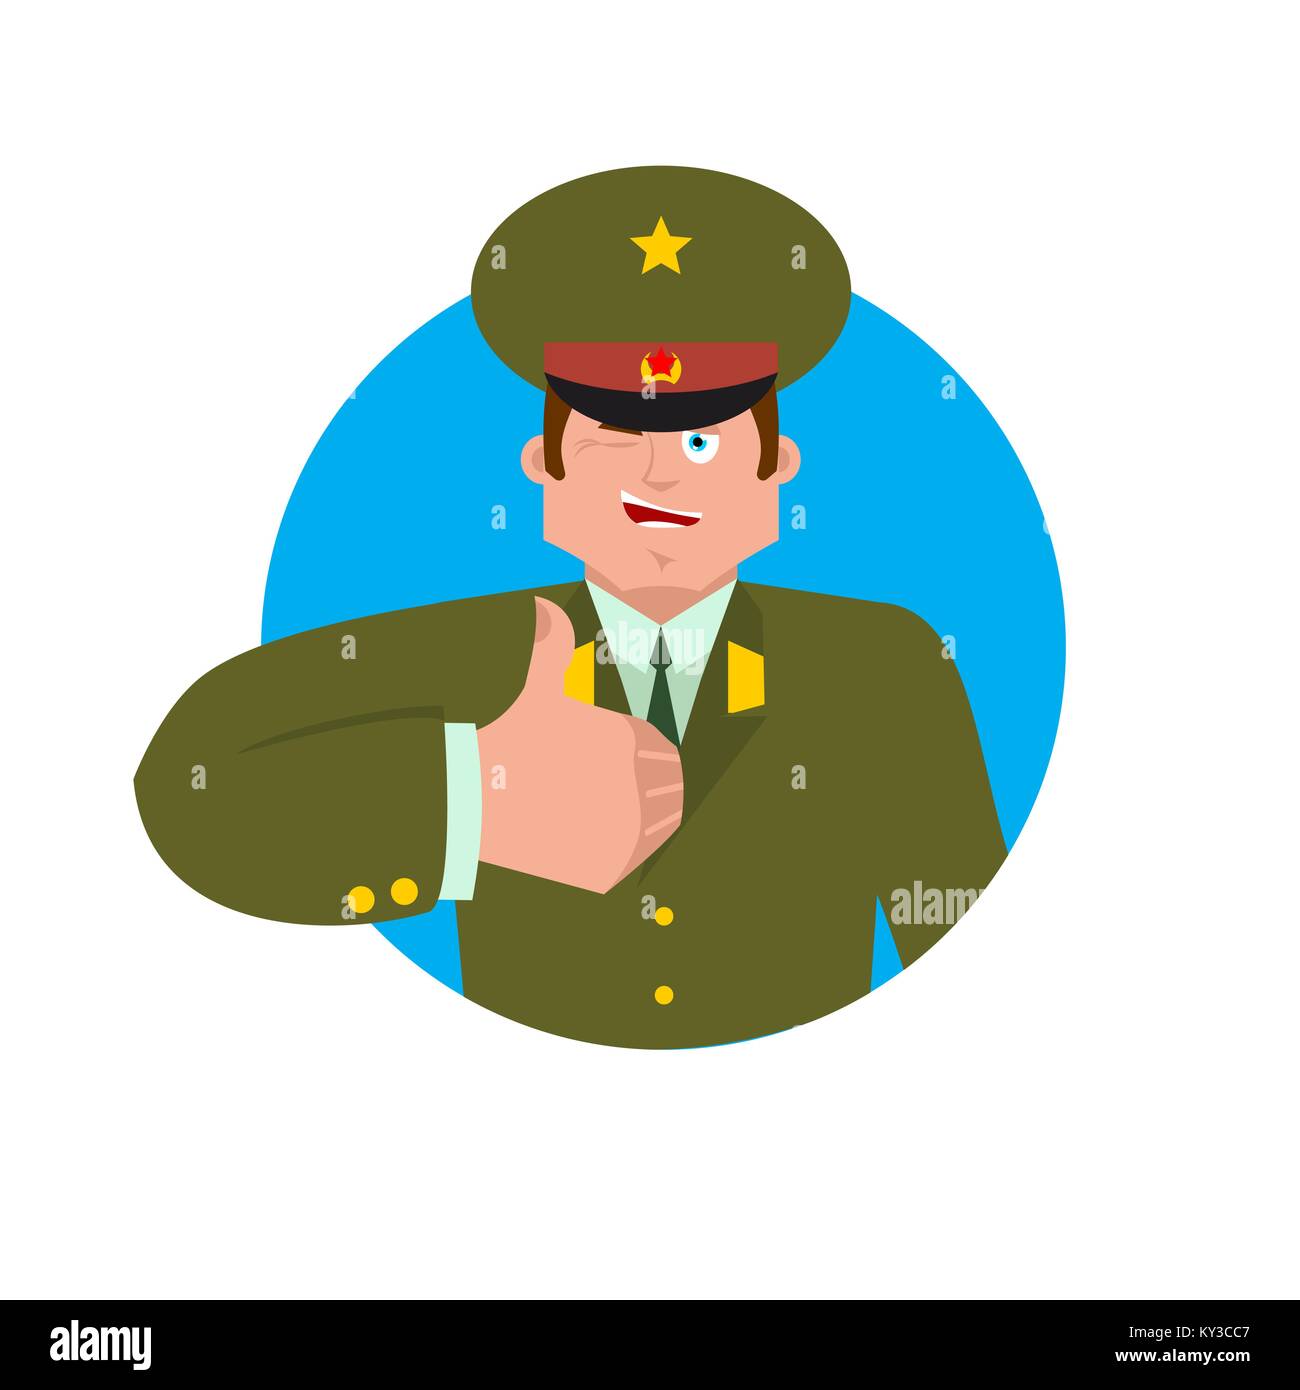 Russian Officer thumbs up and winks. Soldier happy emoji. Military in Russia Joyful. Illustration for 23 February. Defender of Fatherland Day. Army ho Stock Vector